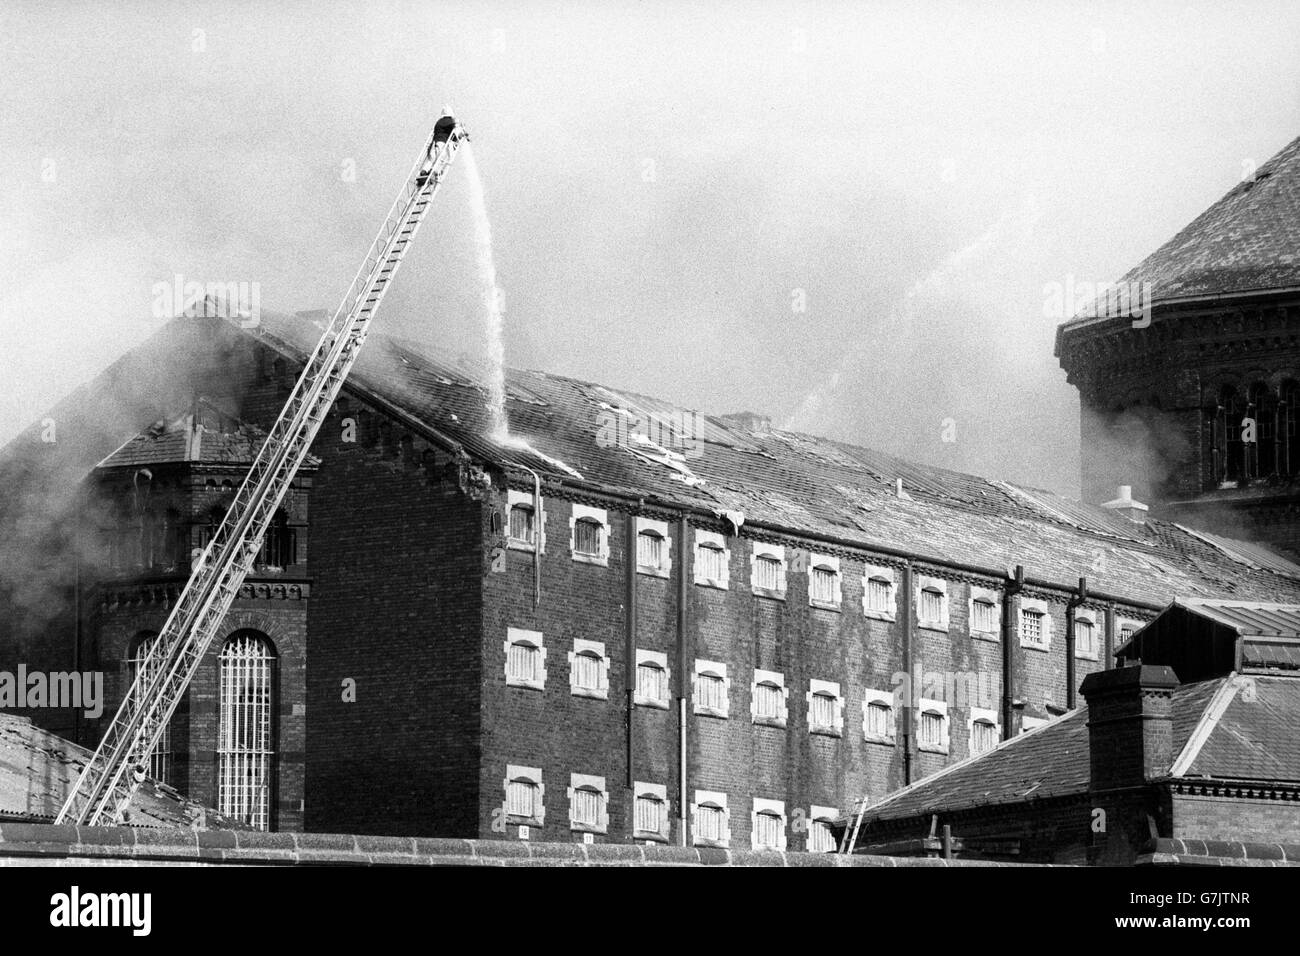 High above Manchester's burning Strangeways prison, a lone fireman battles to put out the dawn fires started by rioters. The six remaining prisoners lit the fires after authorities kept them awake with spotlights, firecrackers and sprayed water from fire hoses on the building. Stock Photo